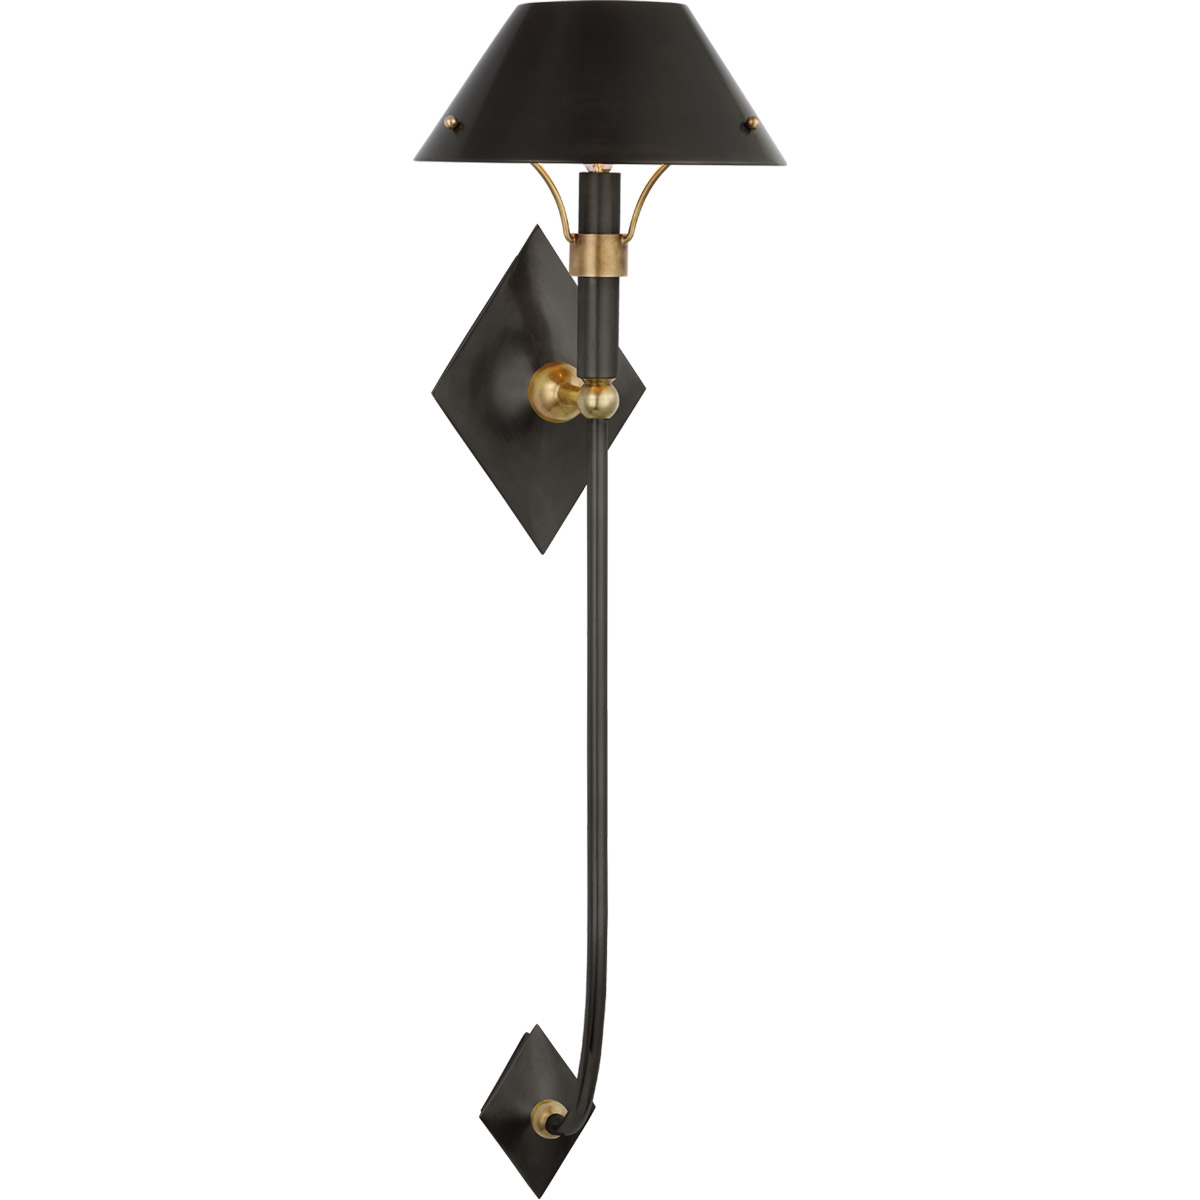 Visual Comfort Signature Collection Turlington Small Pendant in Hand-Rubbed  Antique Brass with Hand-Rubbed Antique Brass Shade by Thomas O'Brien TOB